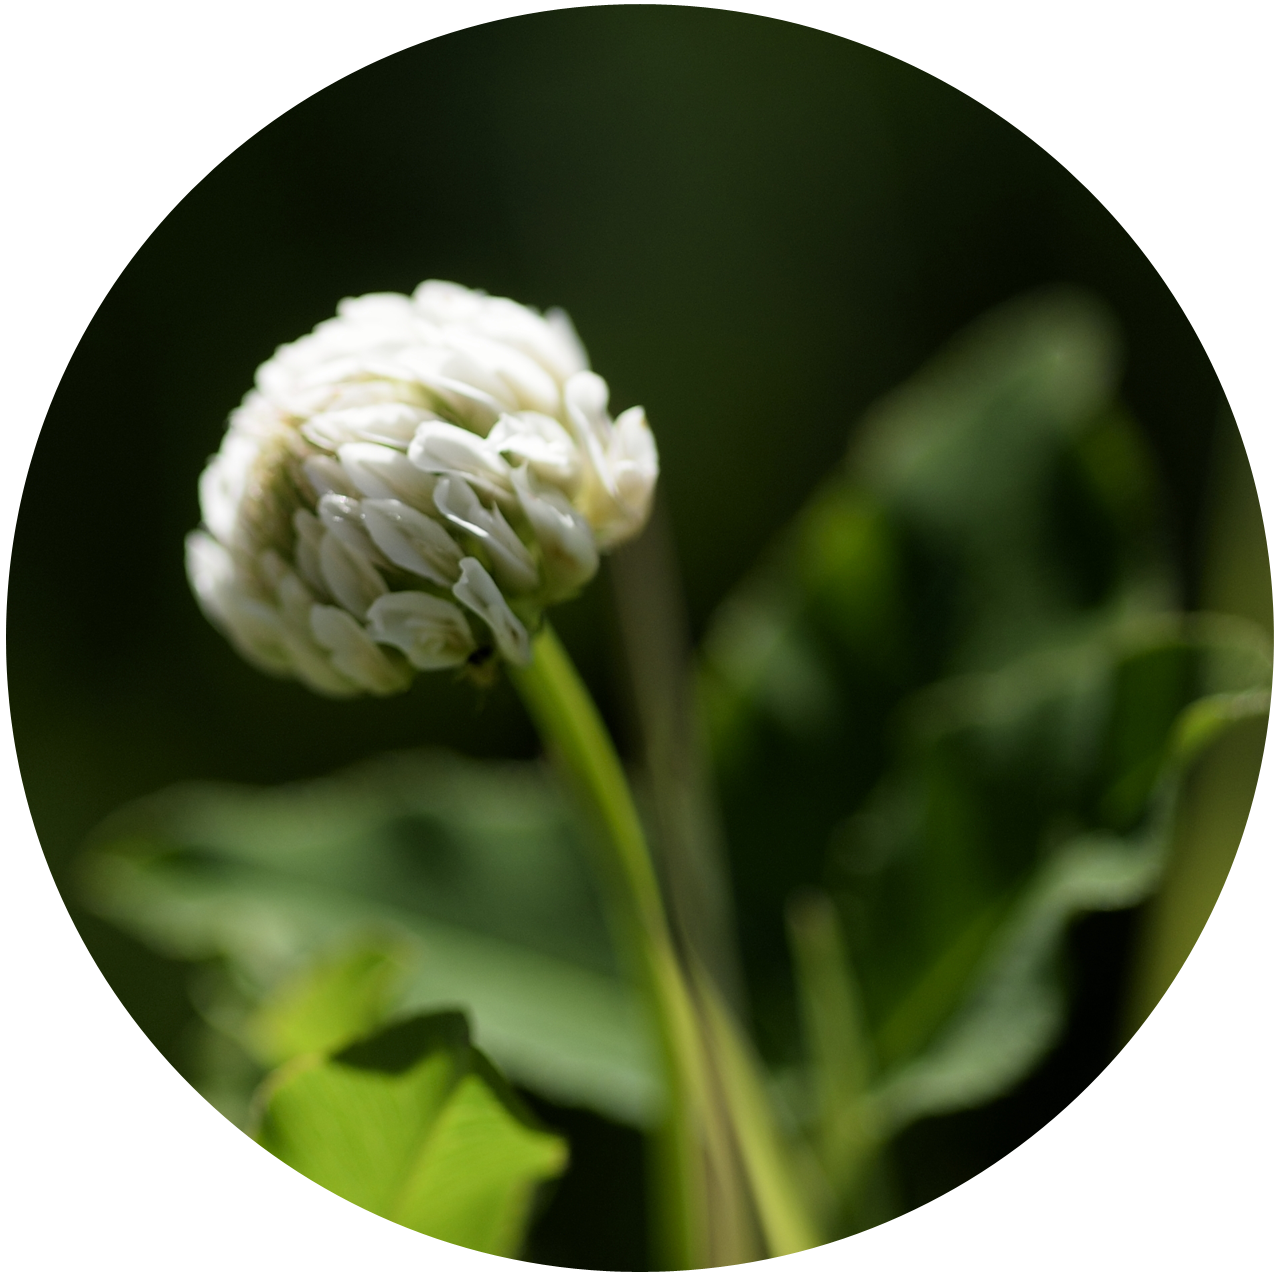 White clover, Trifolium repens. White flowers in a globe-like inflorescence.